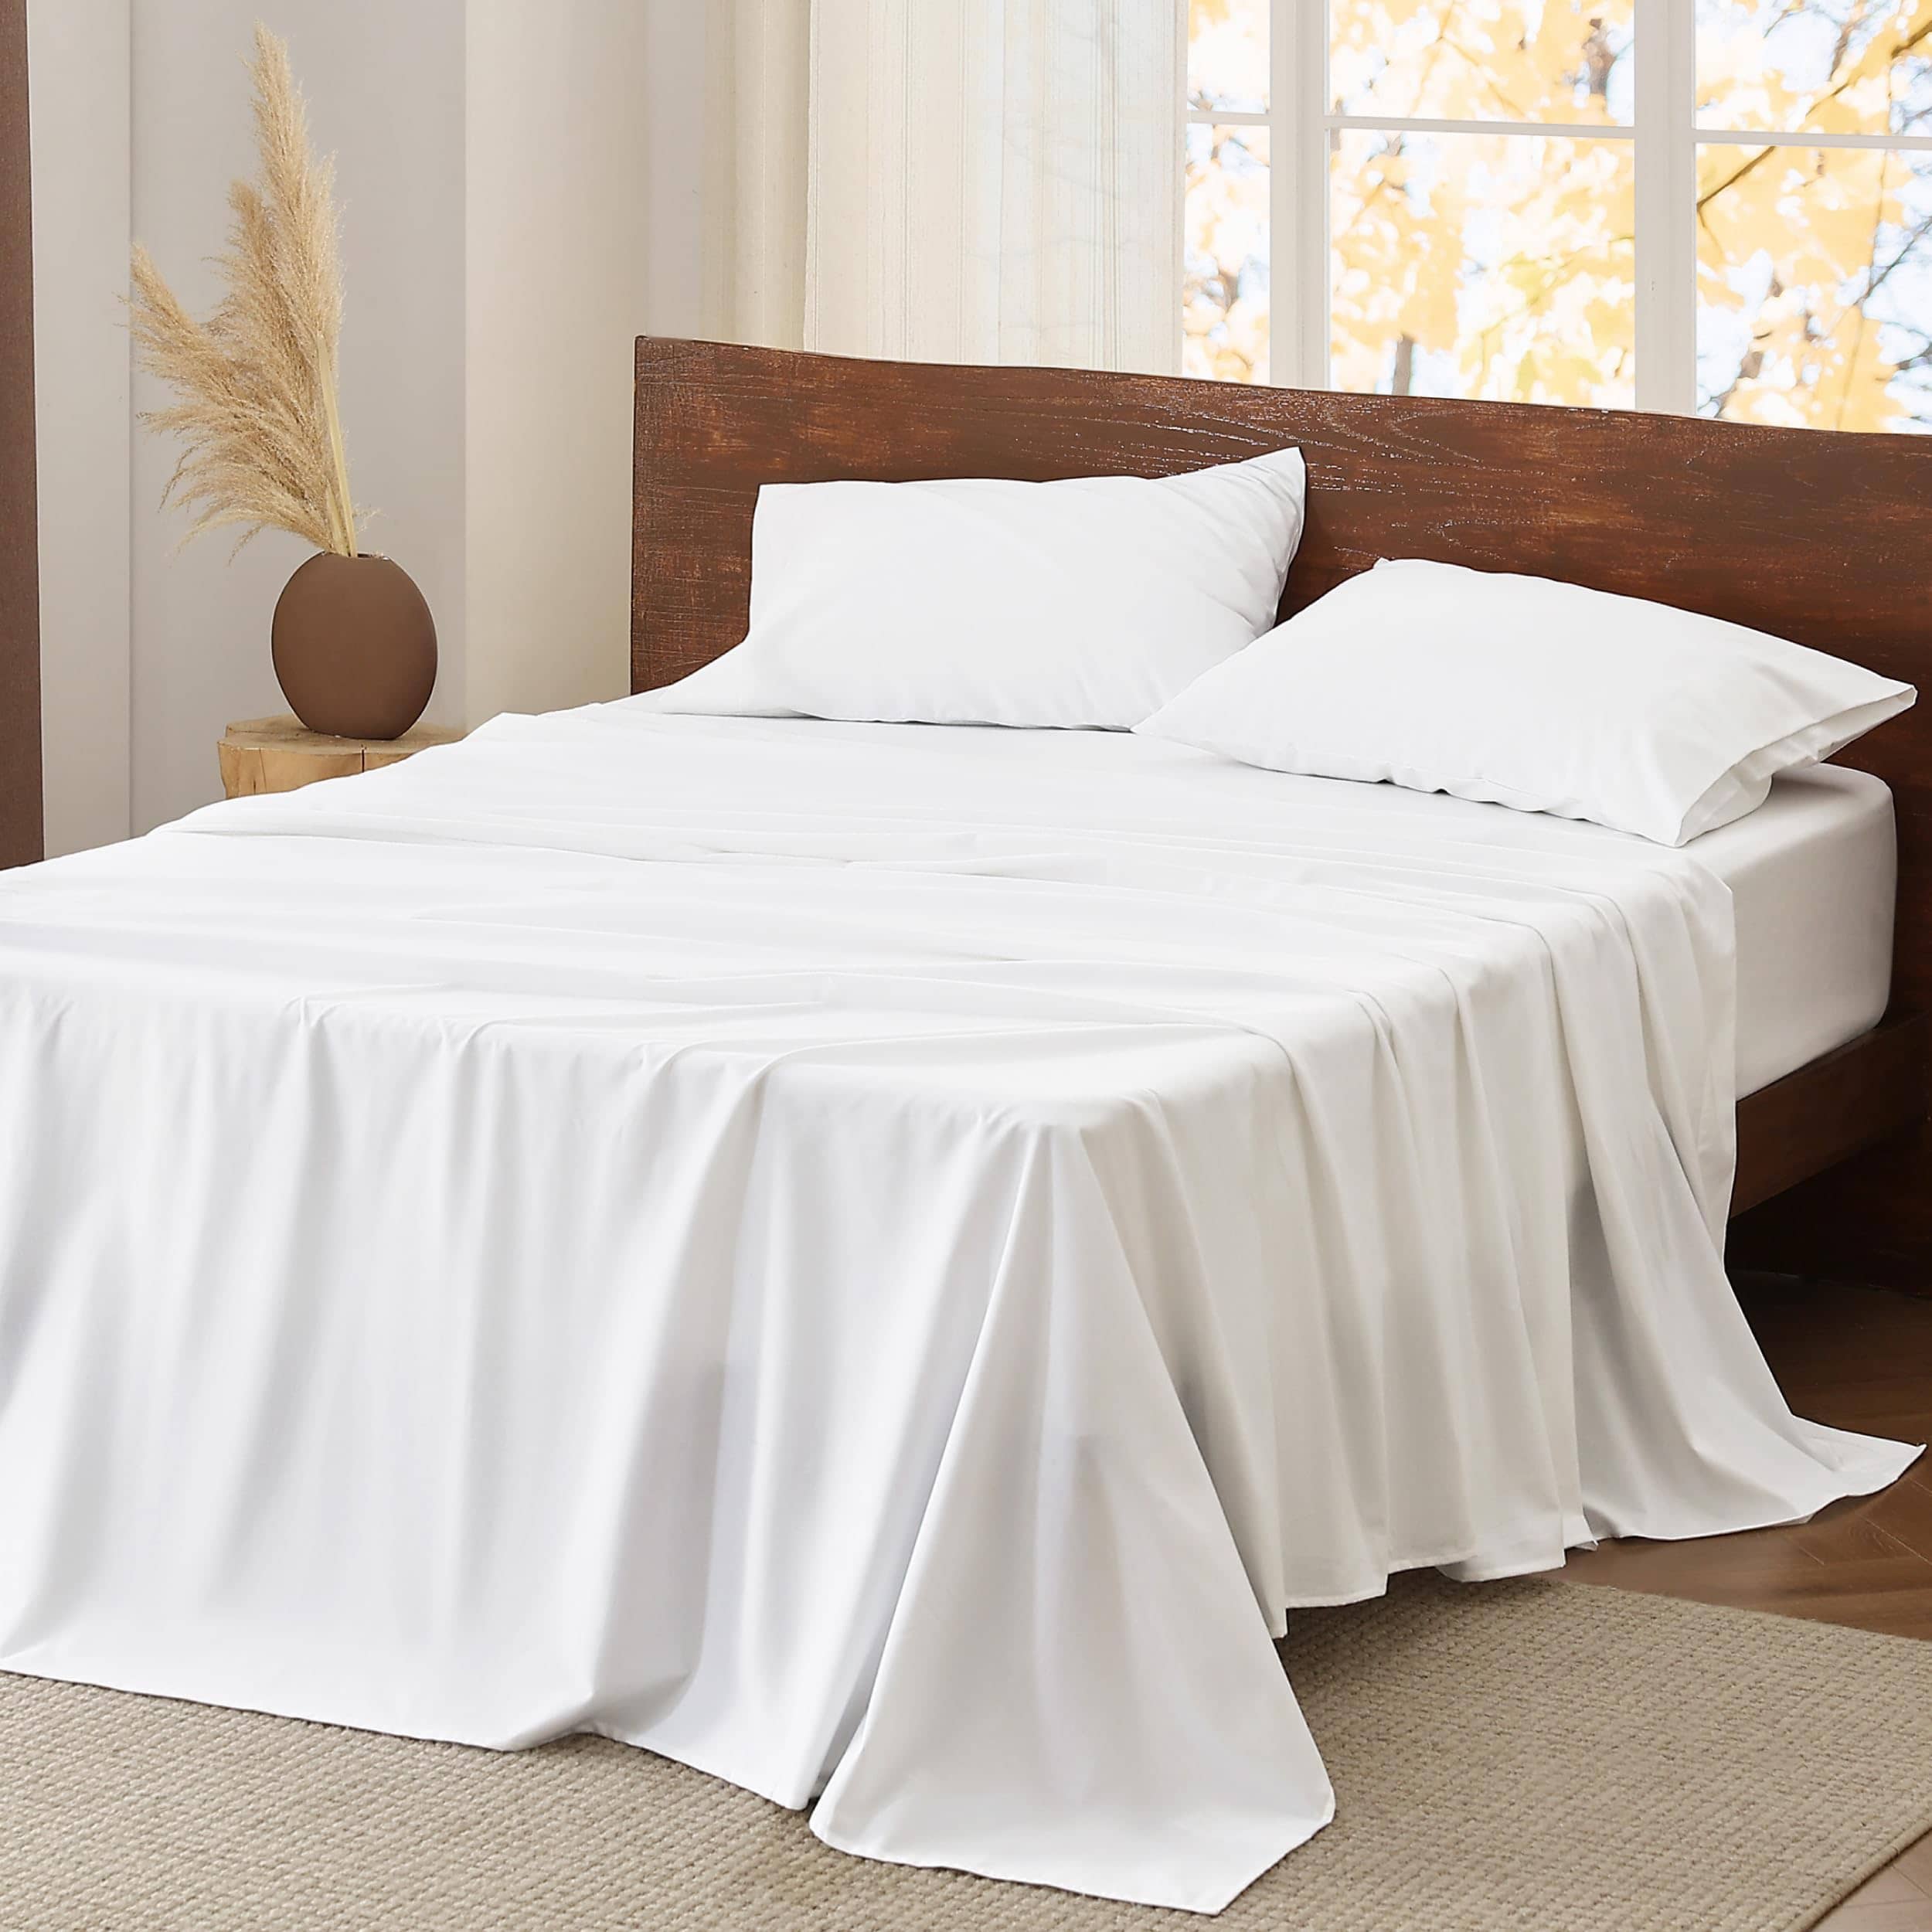 Bedsure Queen Sheets White - Soft Sheets for Queen Size Bed, 4 Pieces Hotel  Luxury White Sheets Queen, Easy Care Polyester Microfiber Cooling Bed